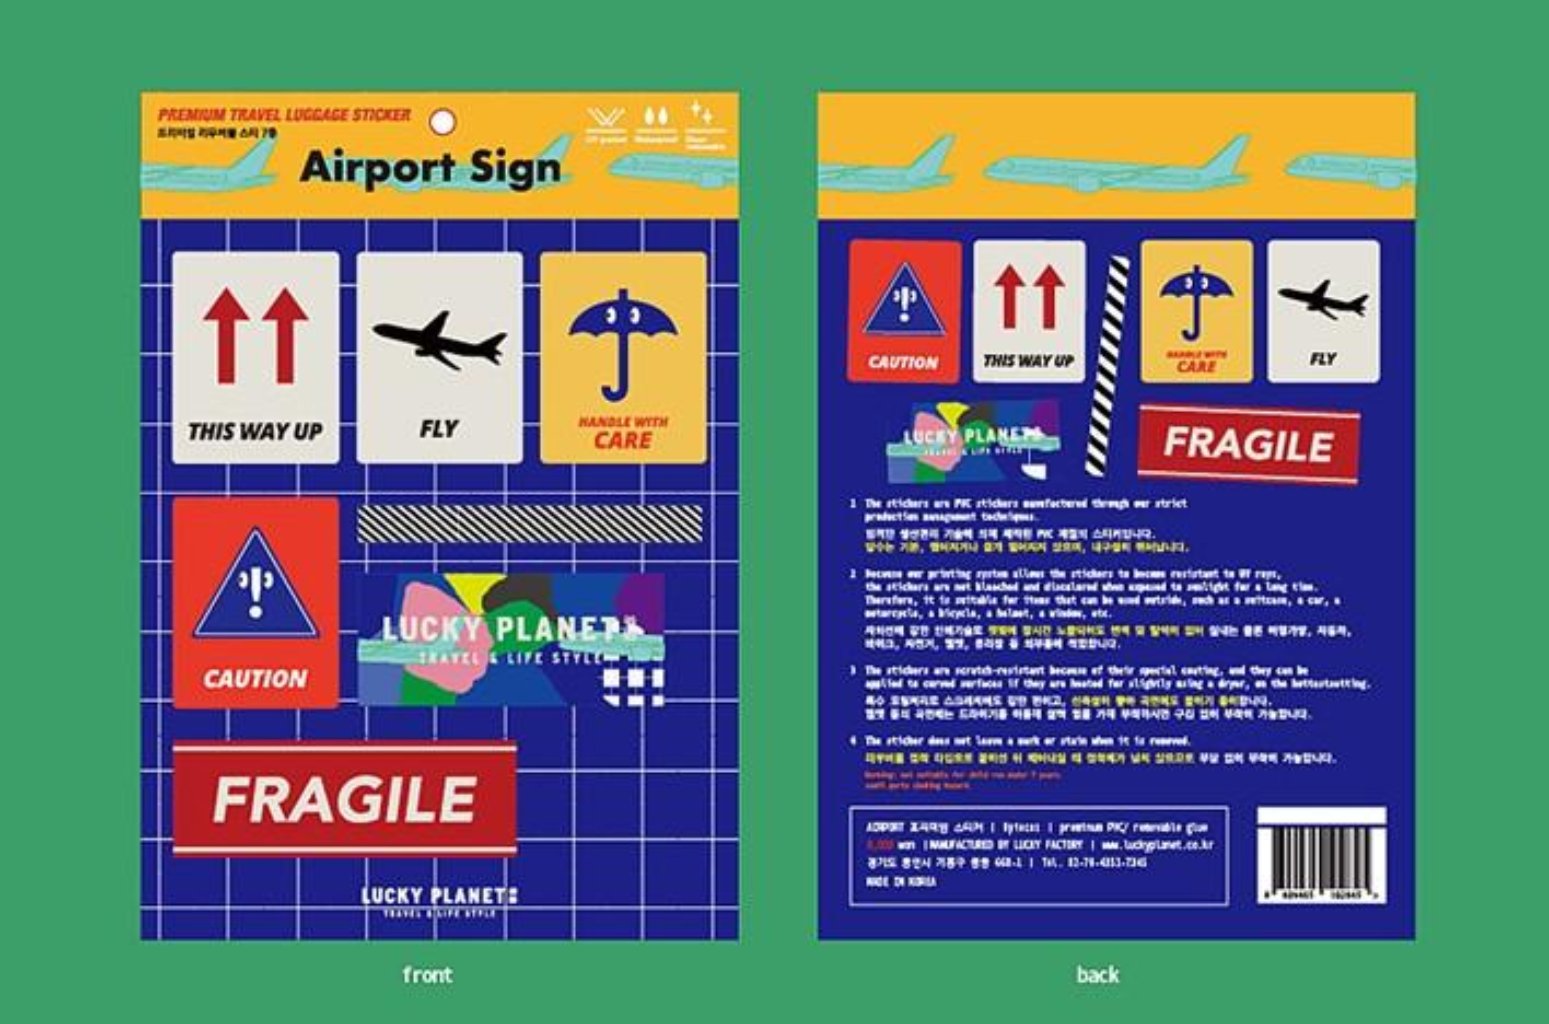 [Lucky Planet] Removable Luggage Reform Stickers - Airport Sign 7PCS - Luckyplanetusa